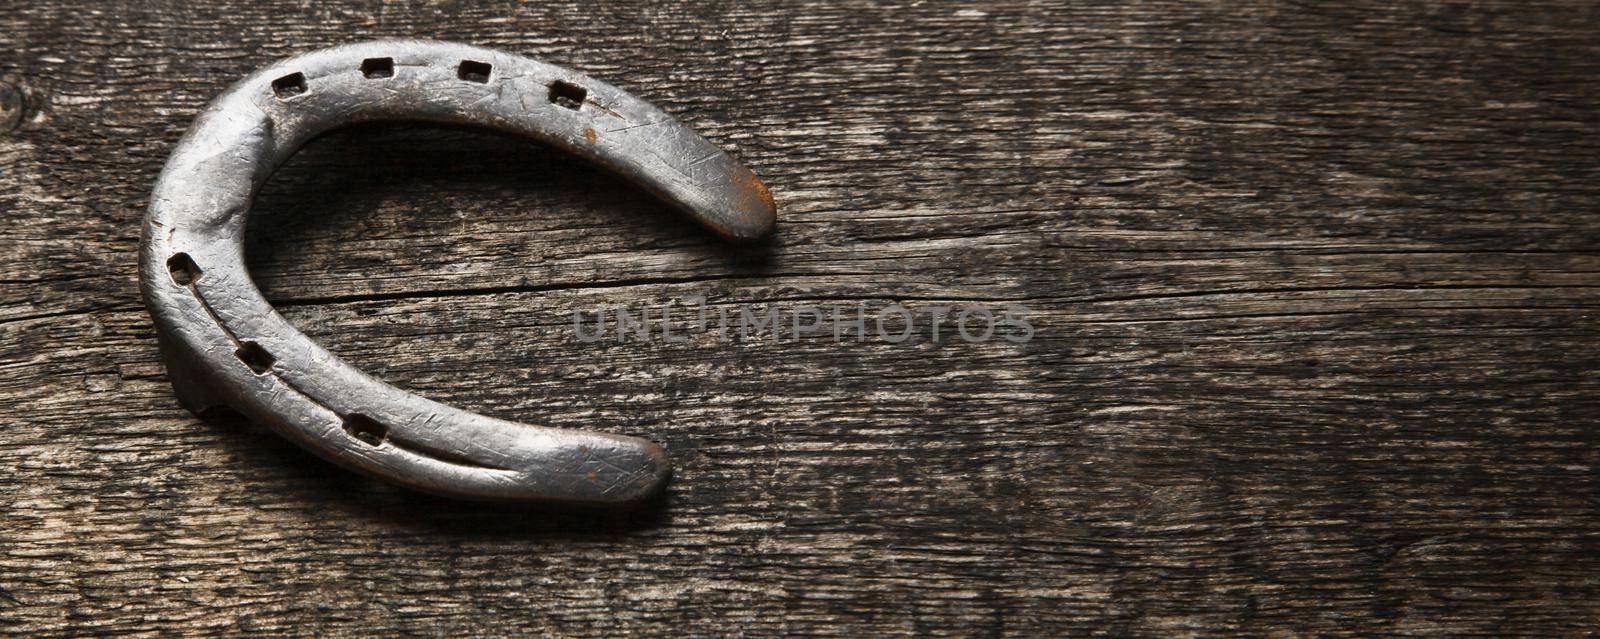 Horseshoe with lucky clover on a wooden background by Taut